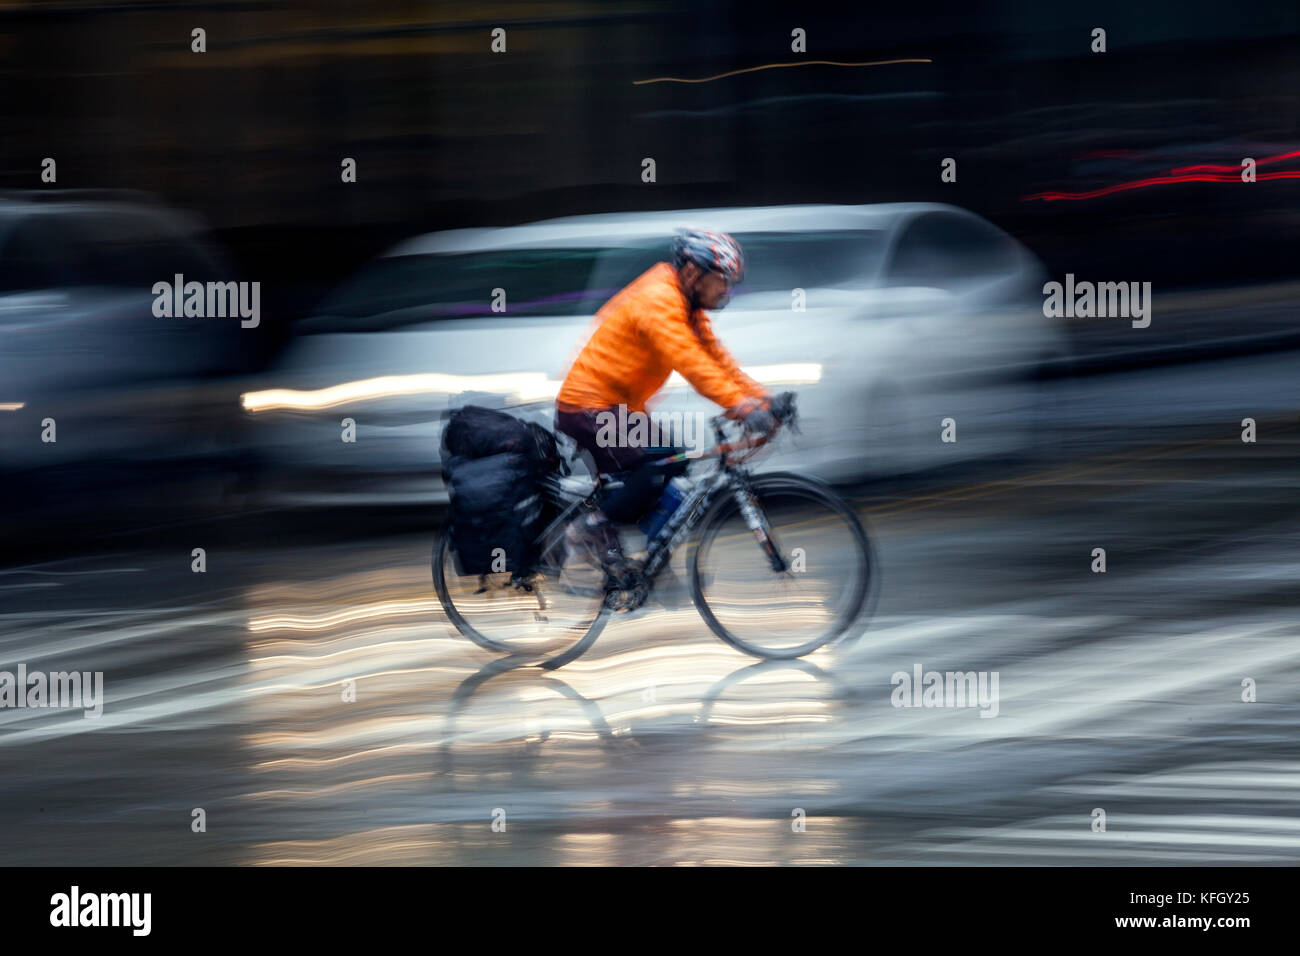 WA14178-00...WASHINGTON - Bicycle rider on a wet day in down town Seattle. (No MR) Stock Photo